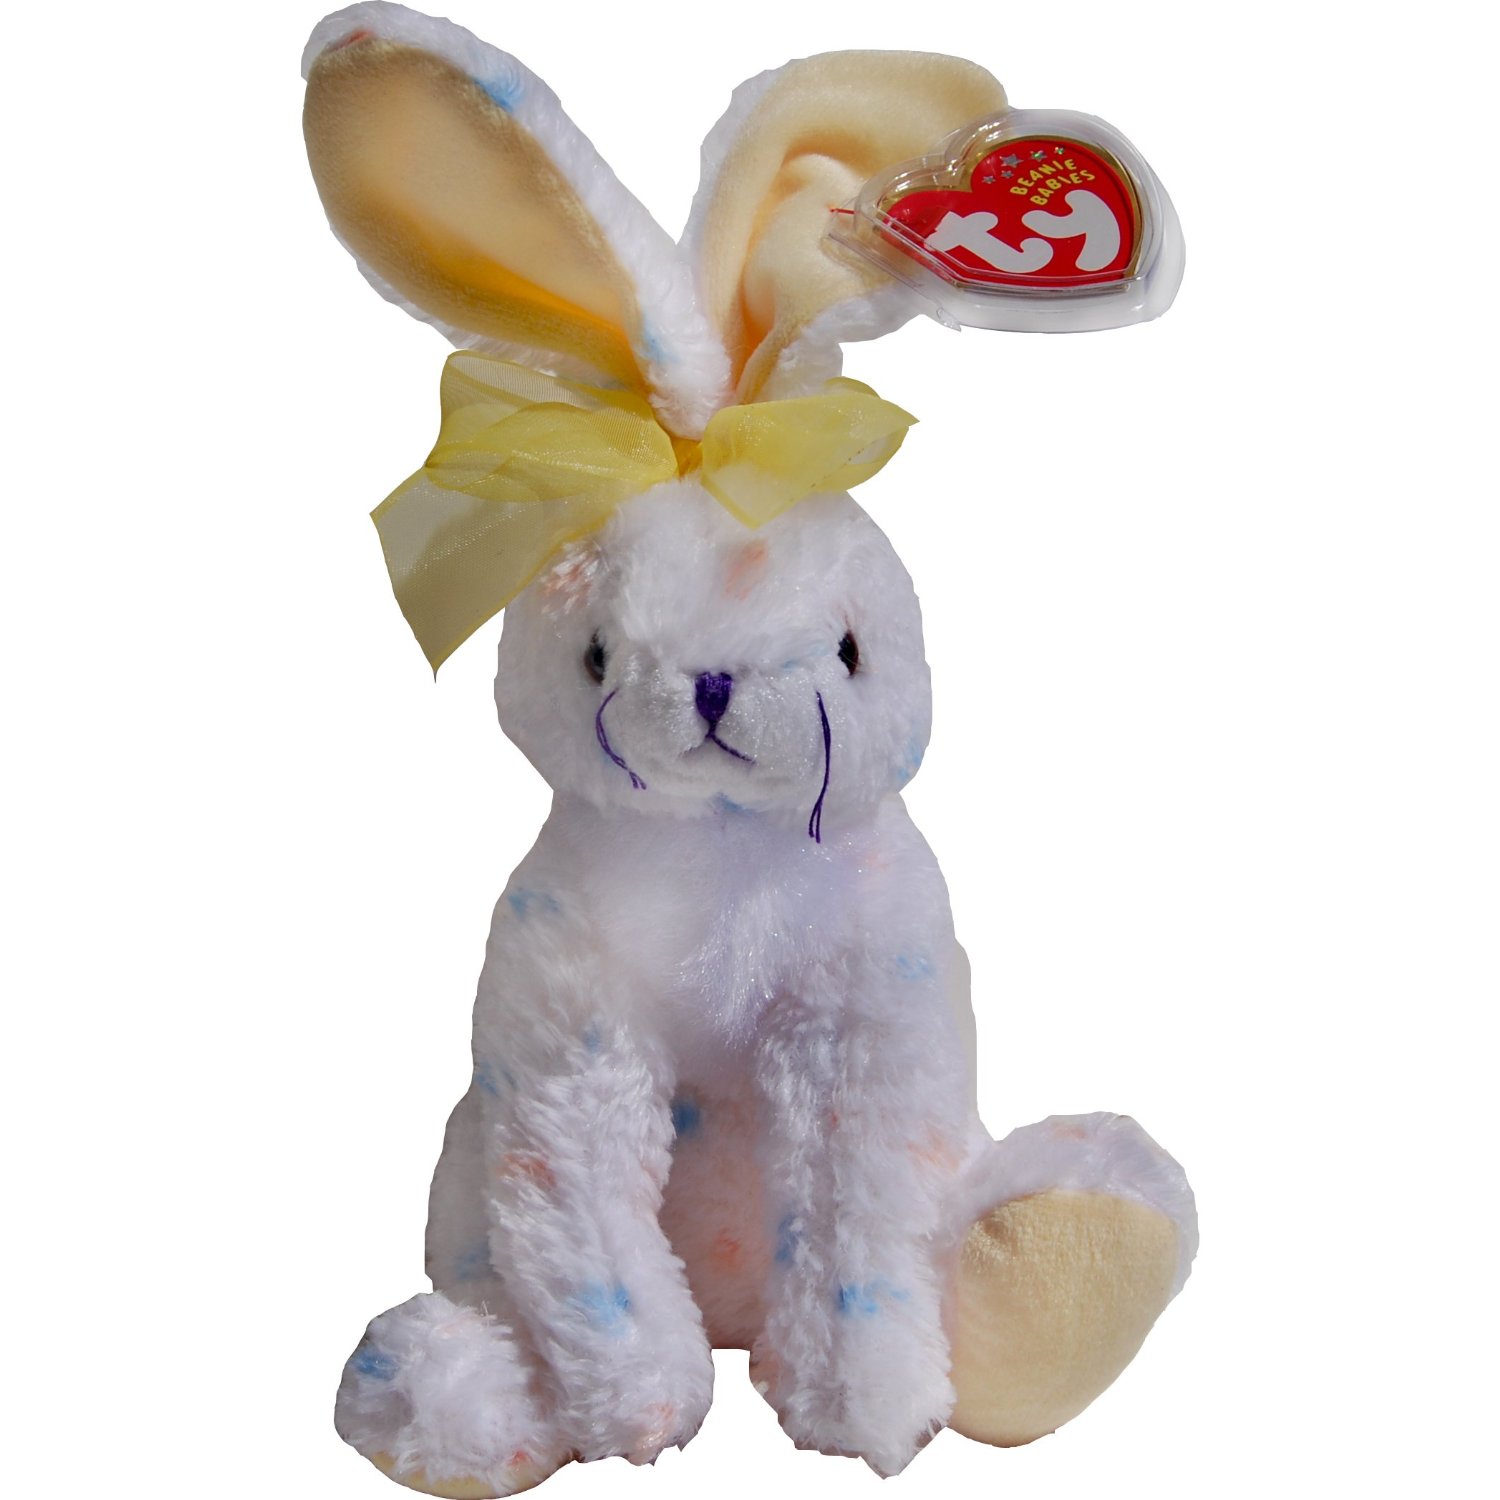 TY PILLOW PAL CARROT THE BUNNY NWT 